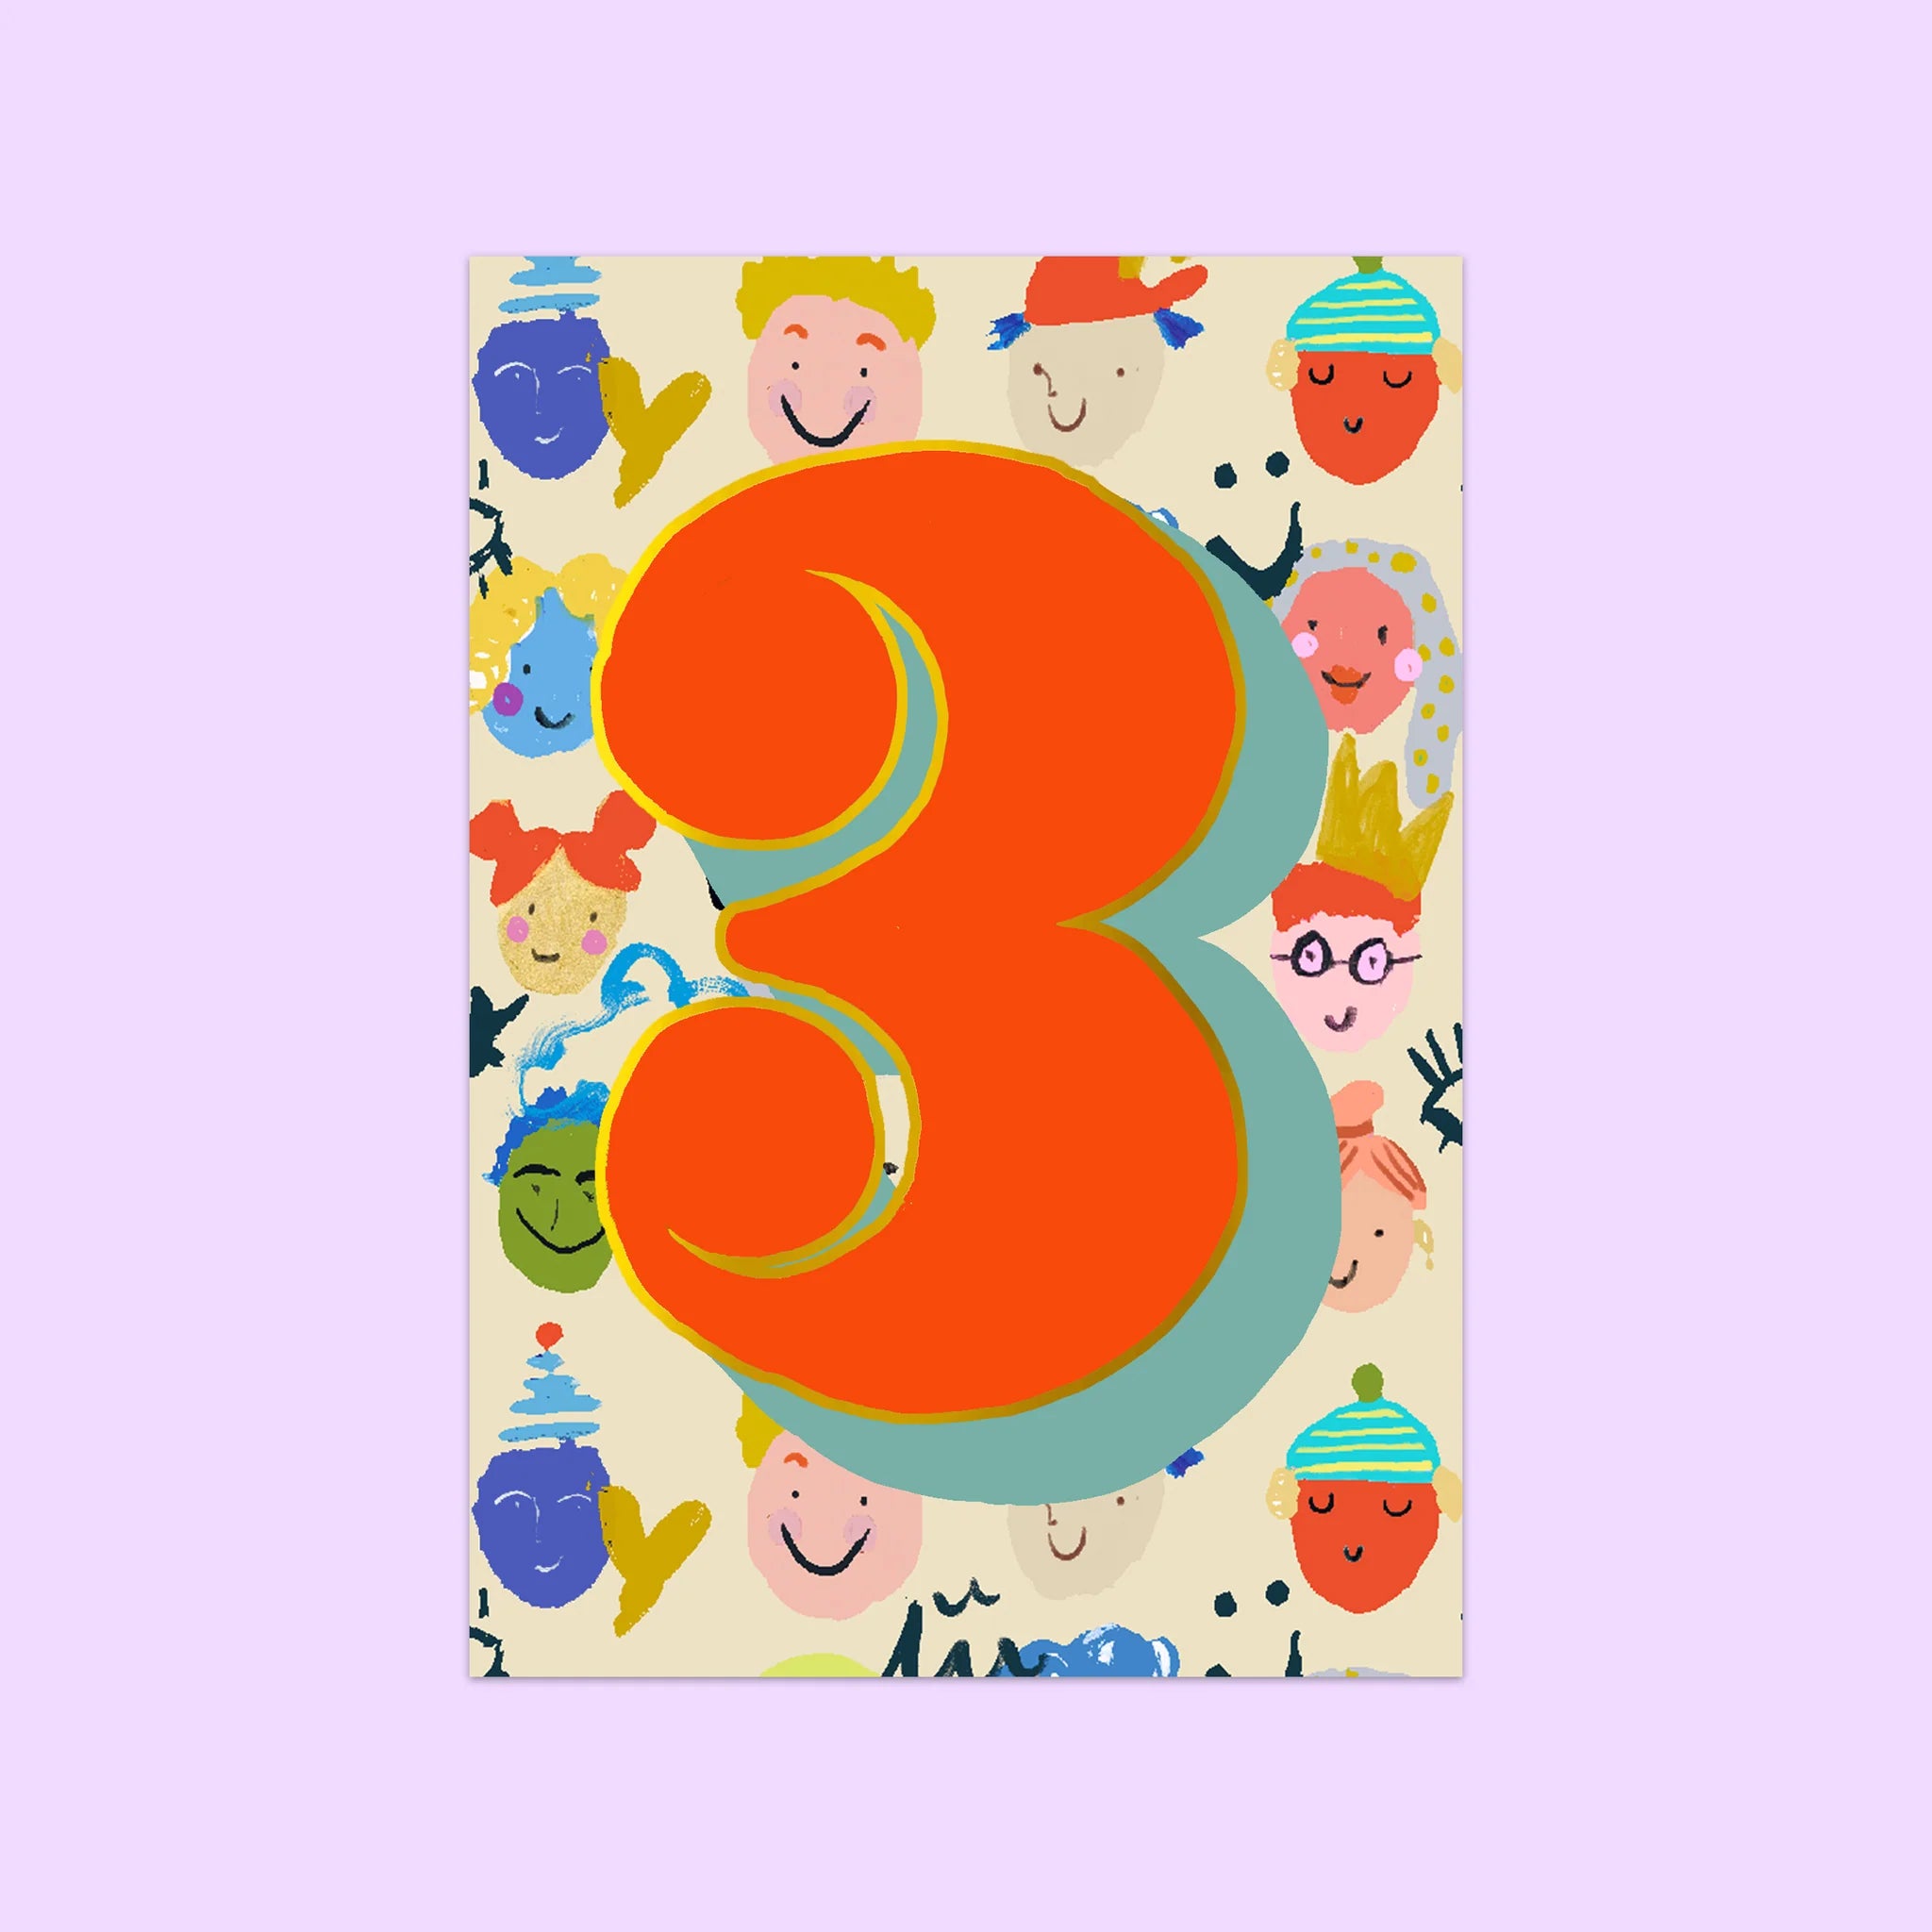 AGE 3 (FACES) | CARD BY ELEANOR BOWMER